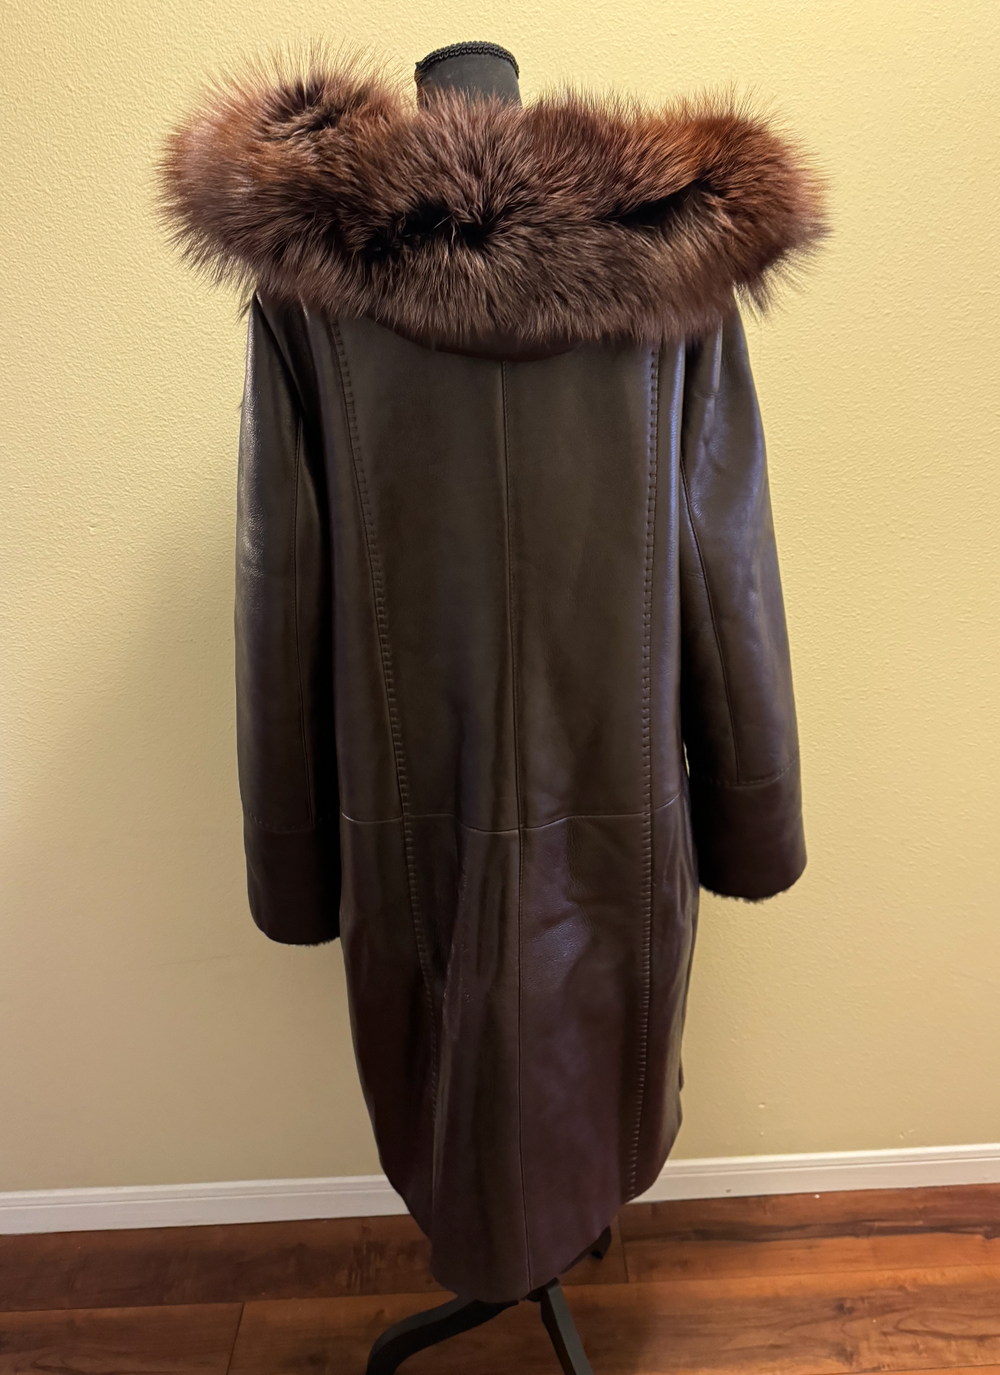 Best fits size L/XL: Brown shearling with fur